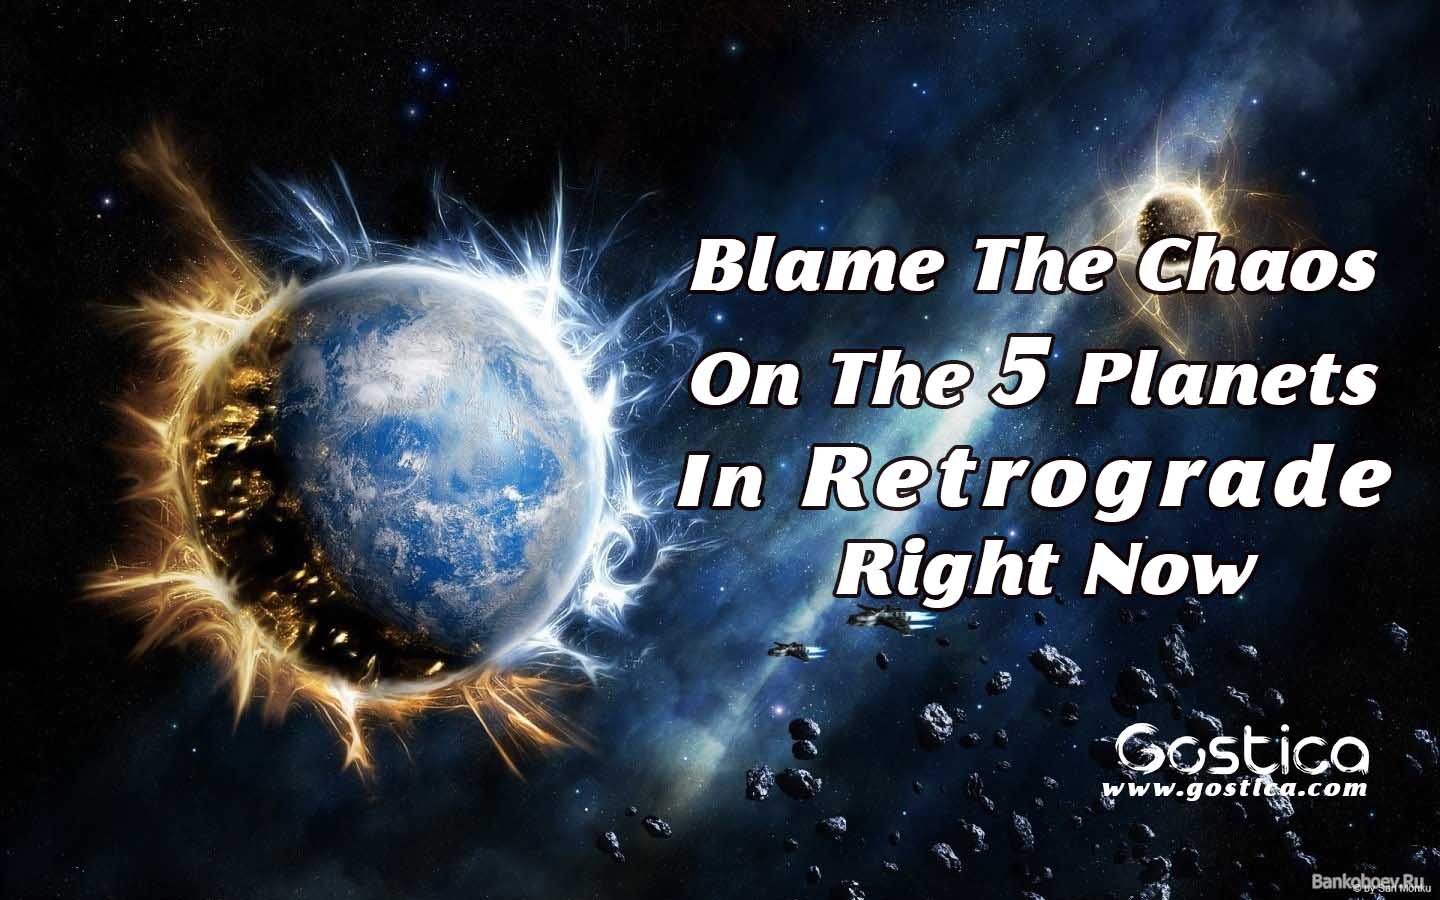 Blame-The-Chaos-On-The-5-Planets-In-Retrograde-Right-Now.jpg